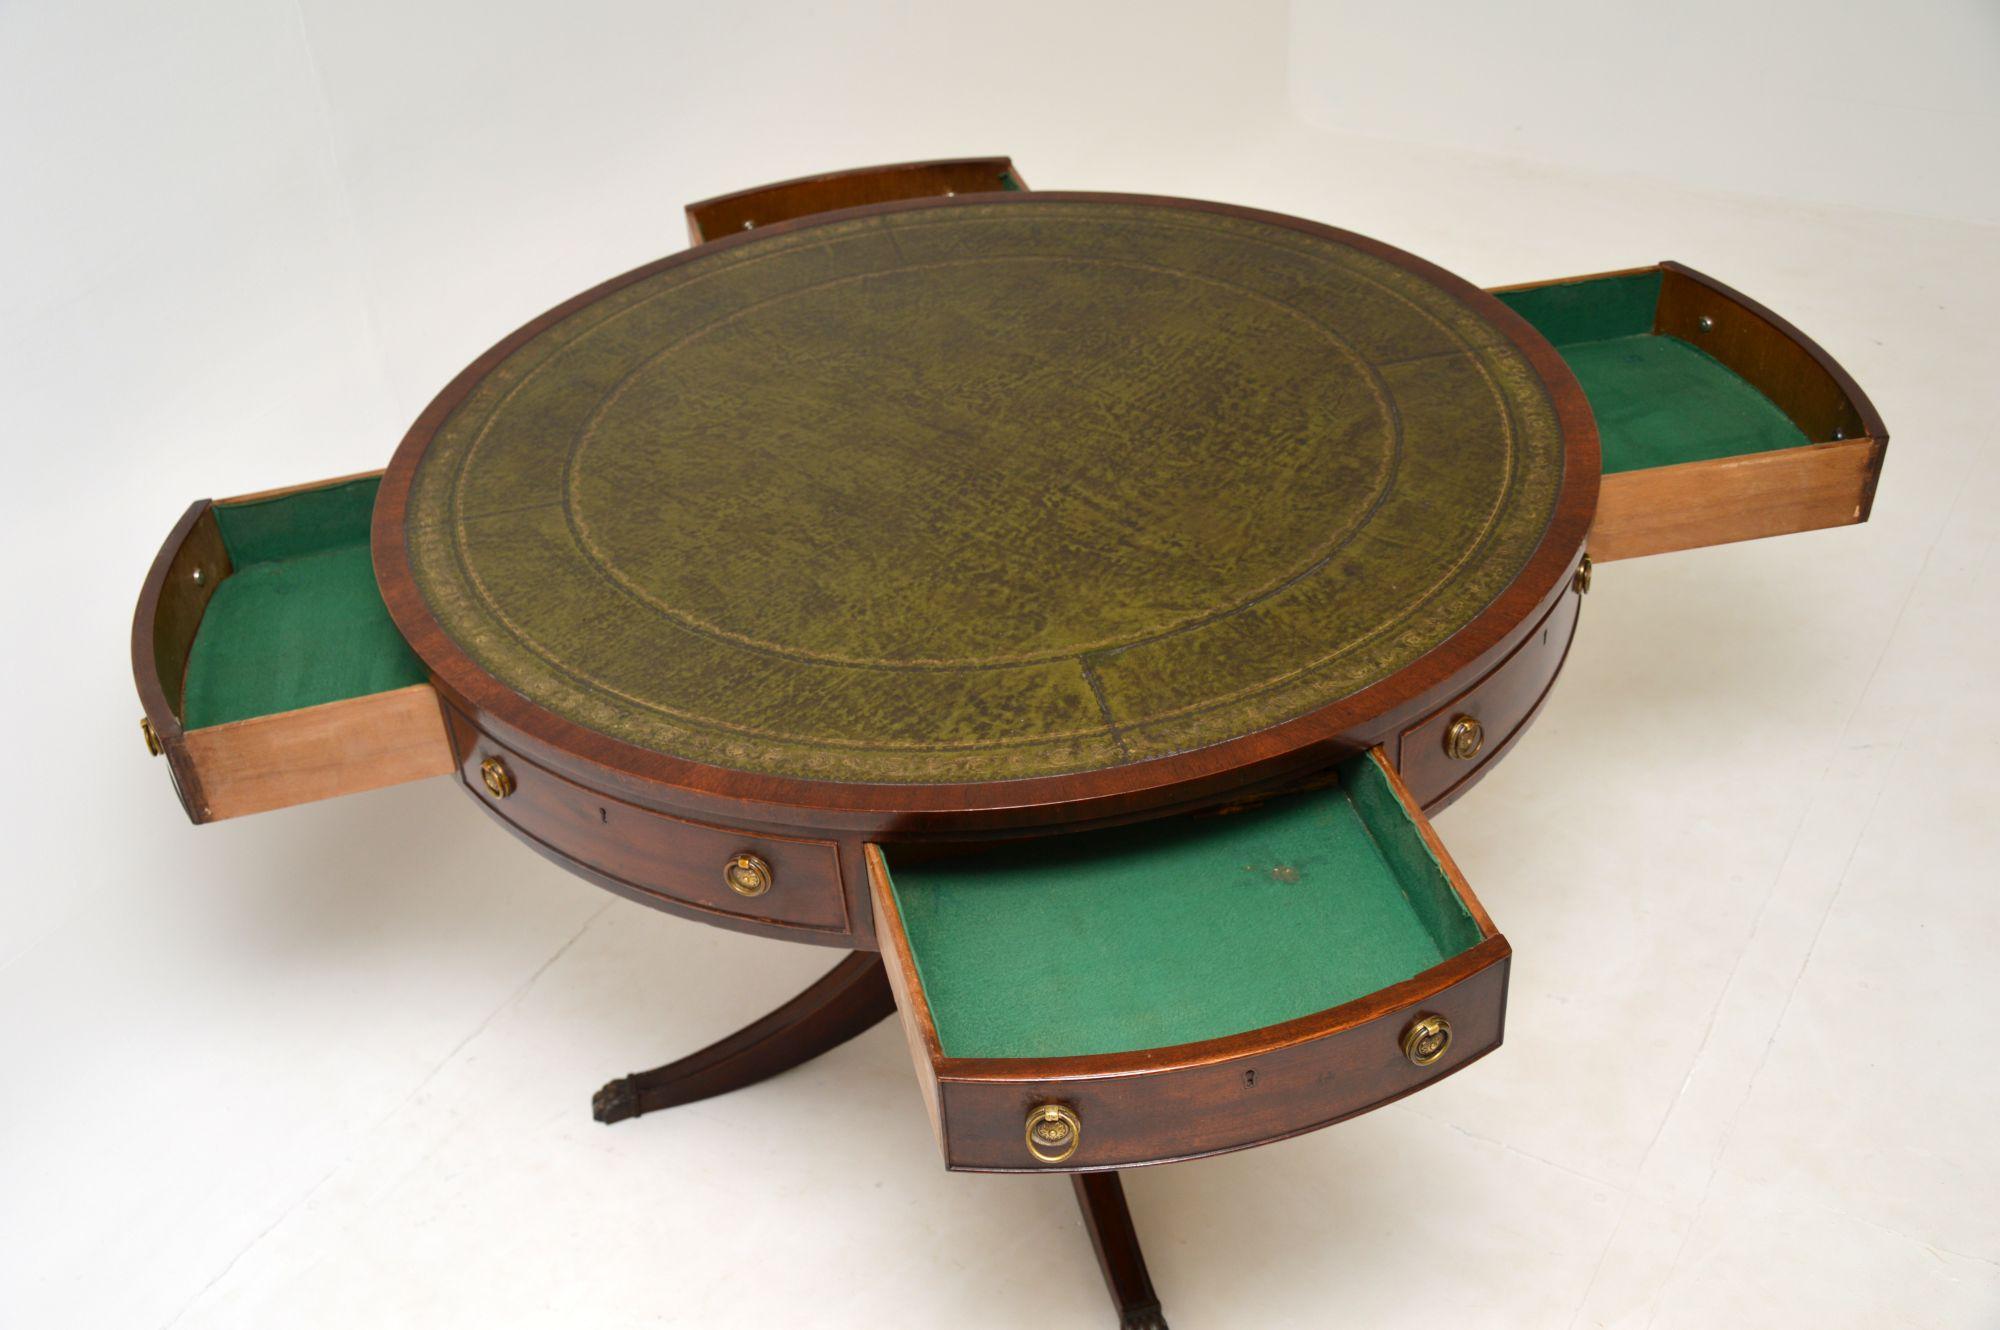 Antique Regency Style Mahogany & Leather Drum Table 1